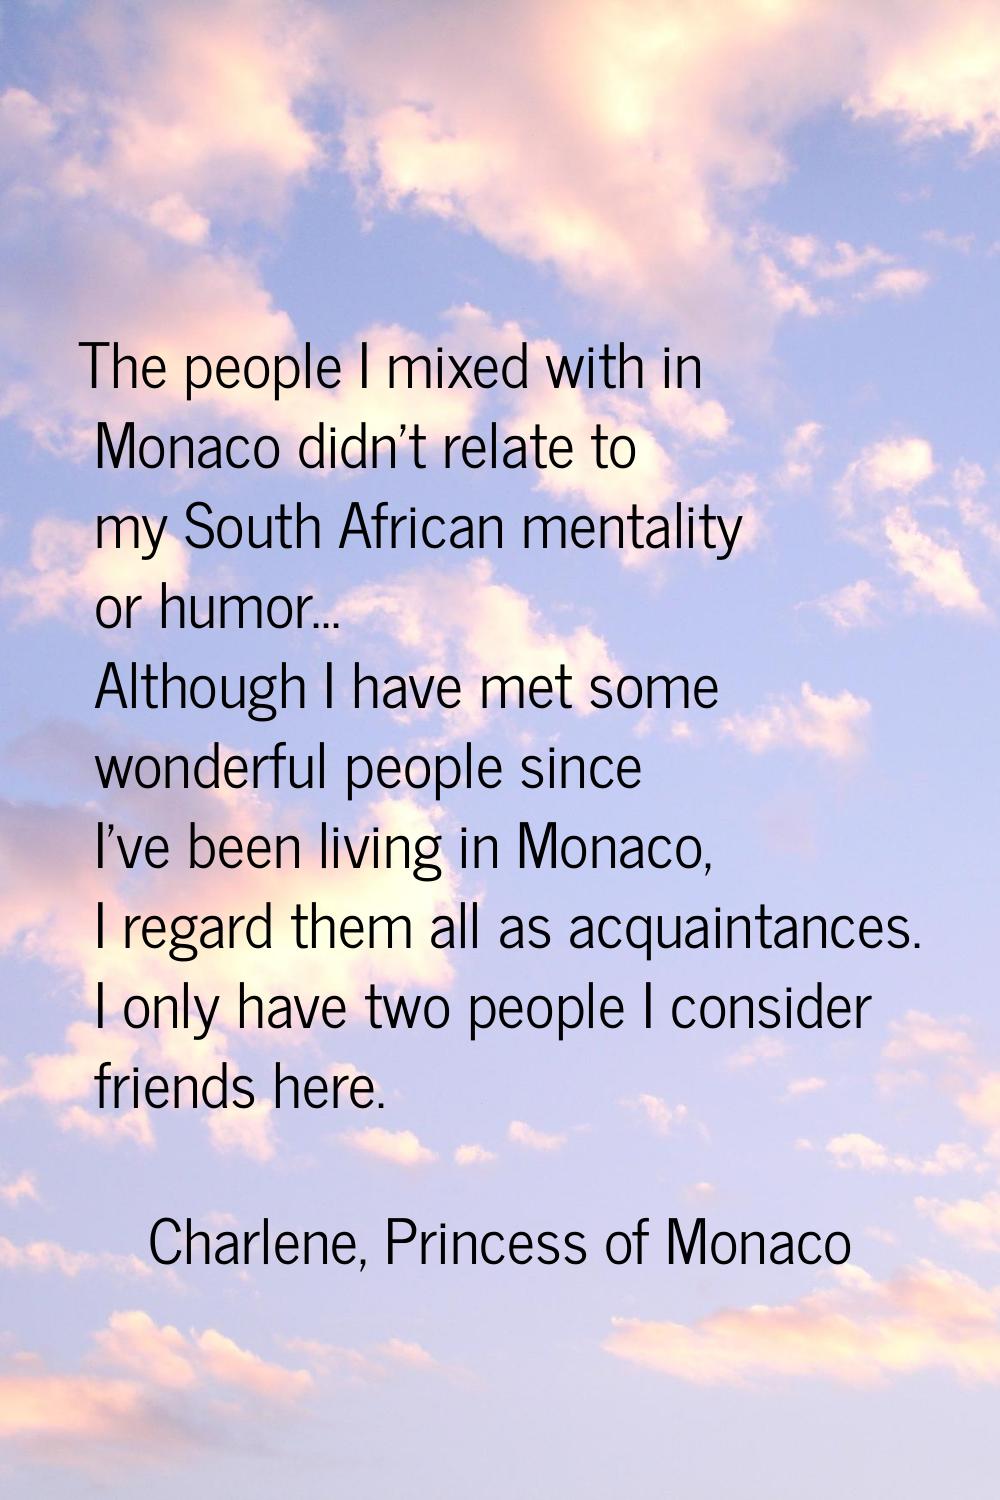 The people I mixed with in Monaco didn't relate to my South African mentality or humor... Although 